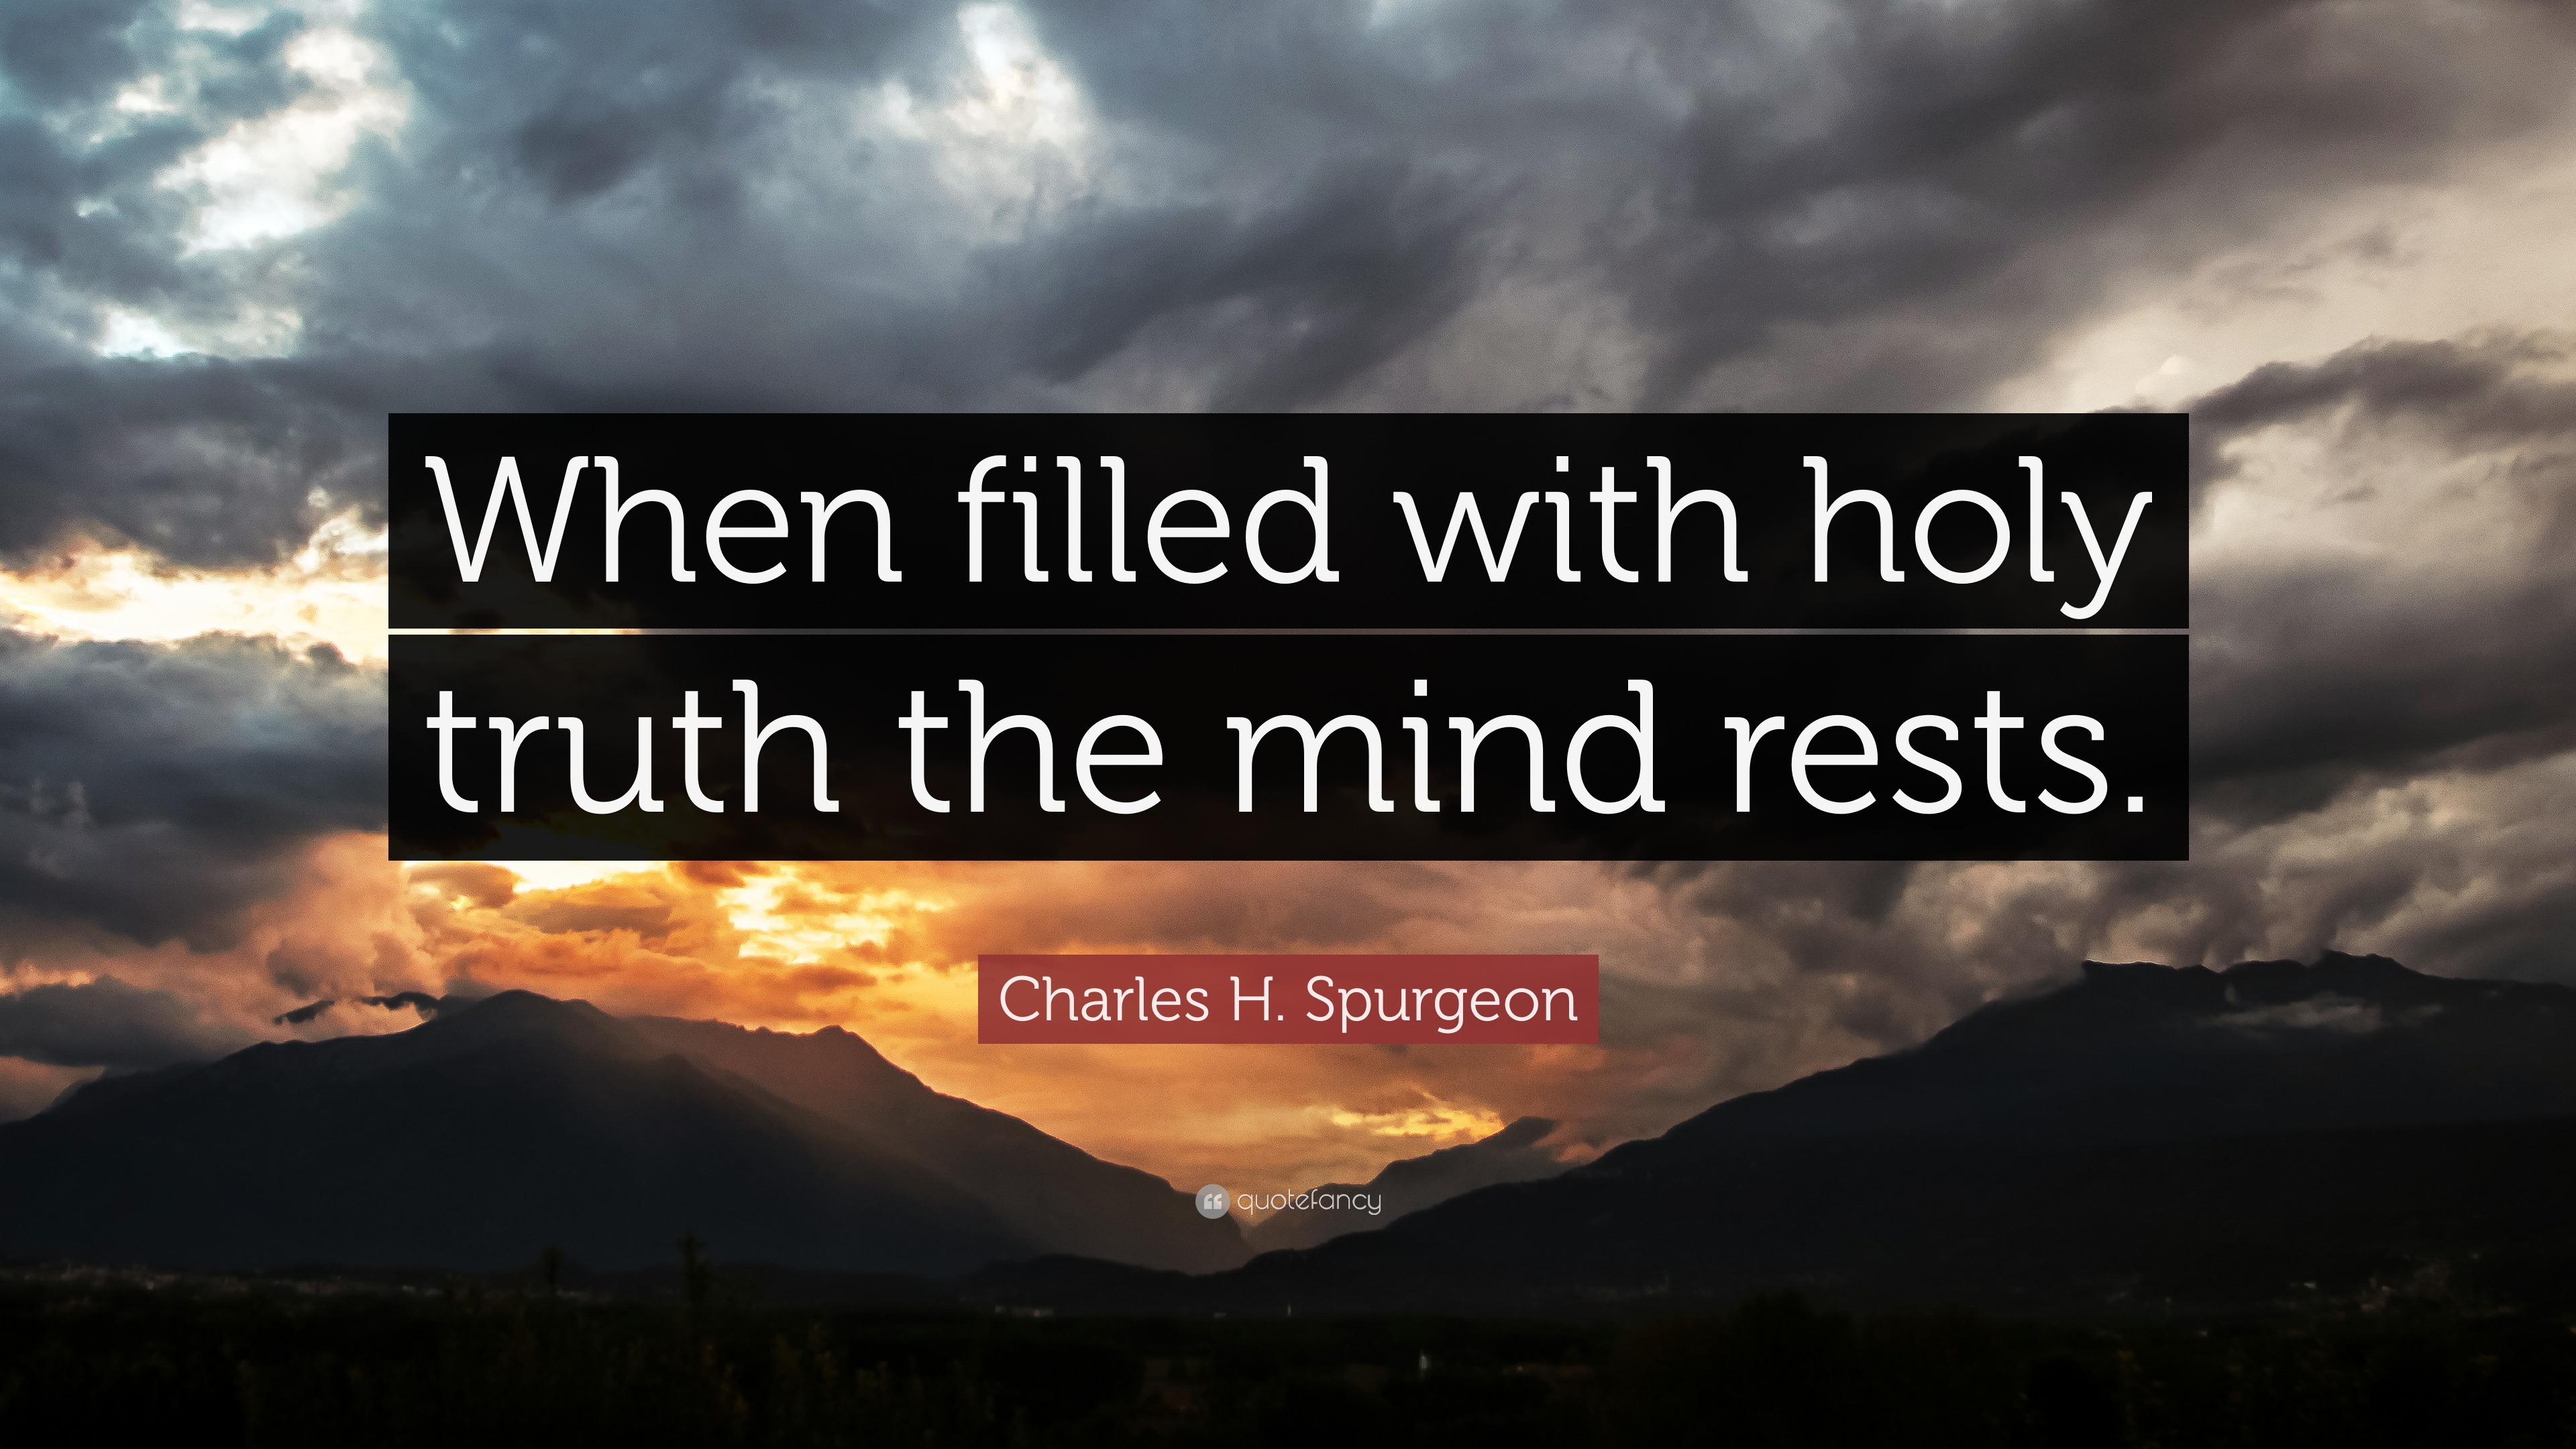 Charles H. Spurgeon Quote: “When filled with holy truth the mind rests.”